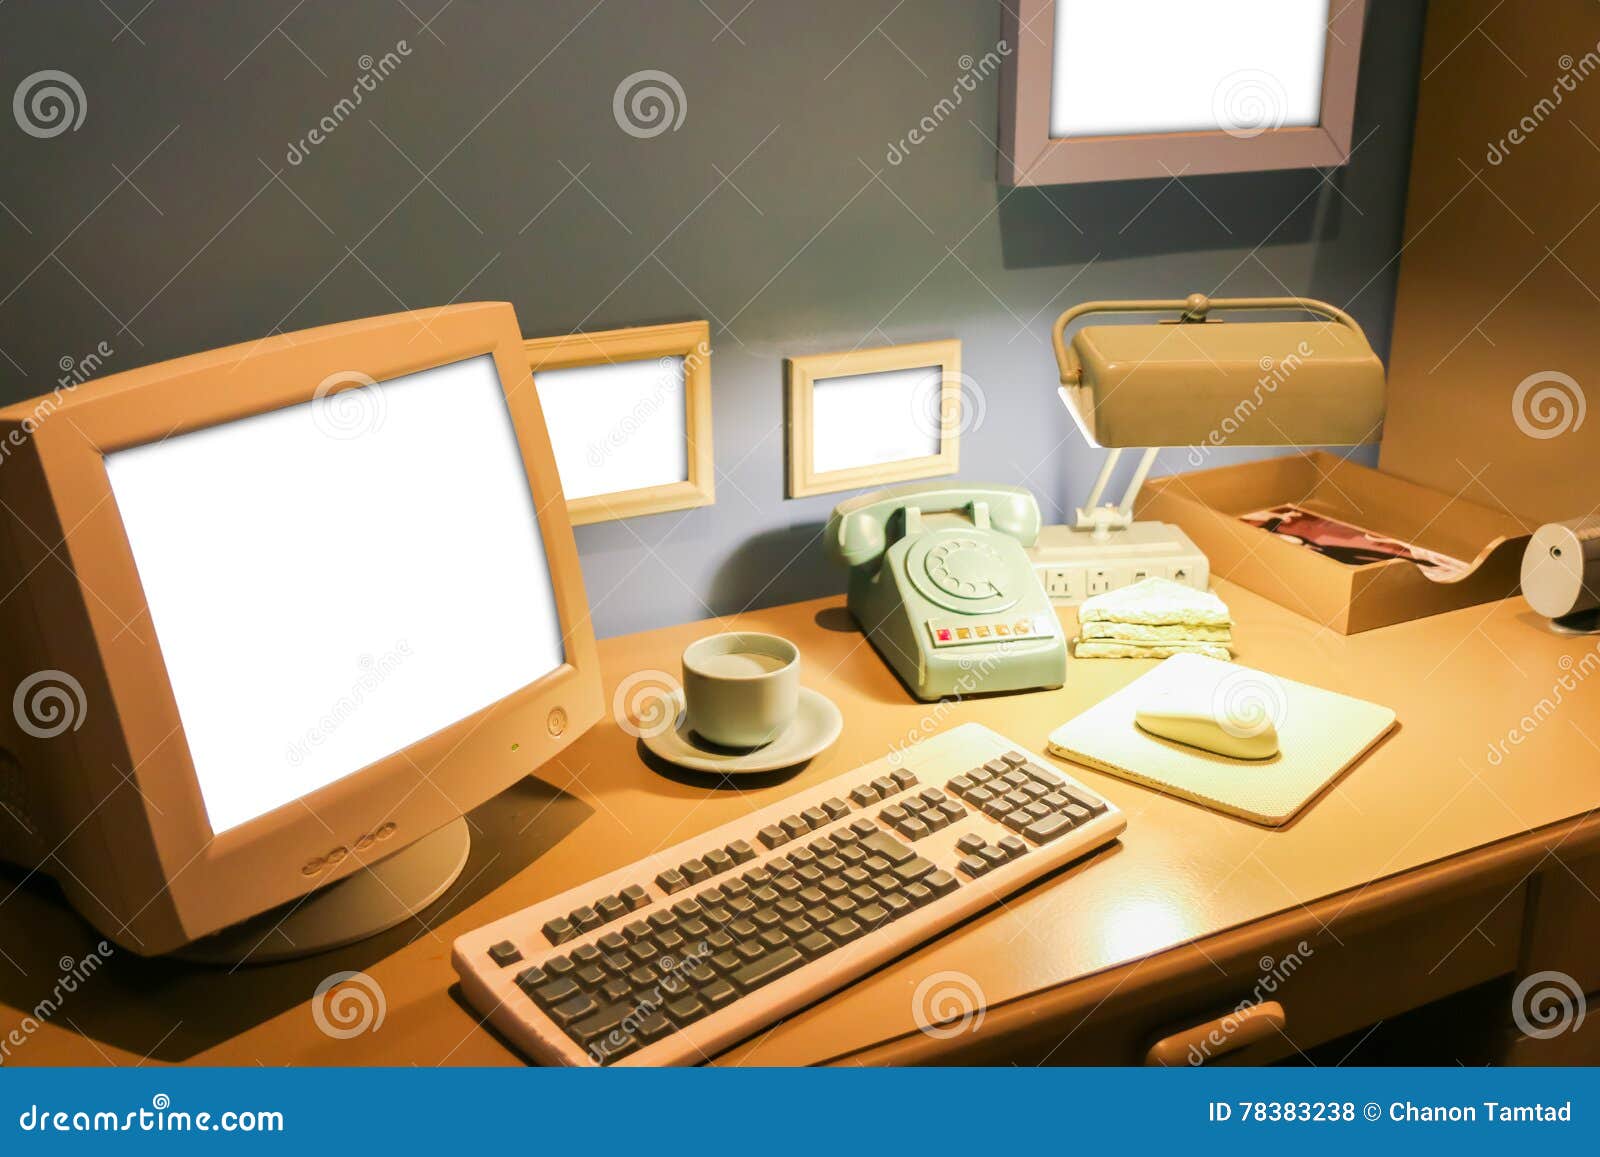 Retro Office Desk in Dark Room with Simulator Object. Stock Photo - Image  of screen, computer: 78383238